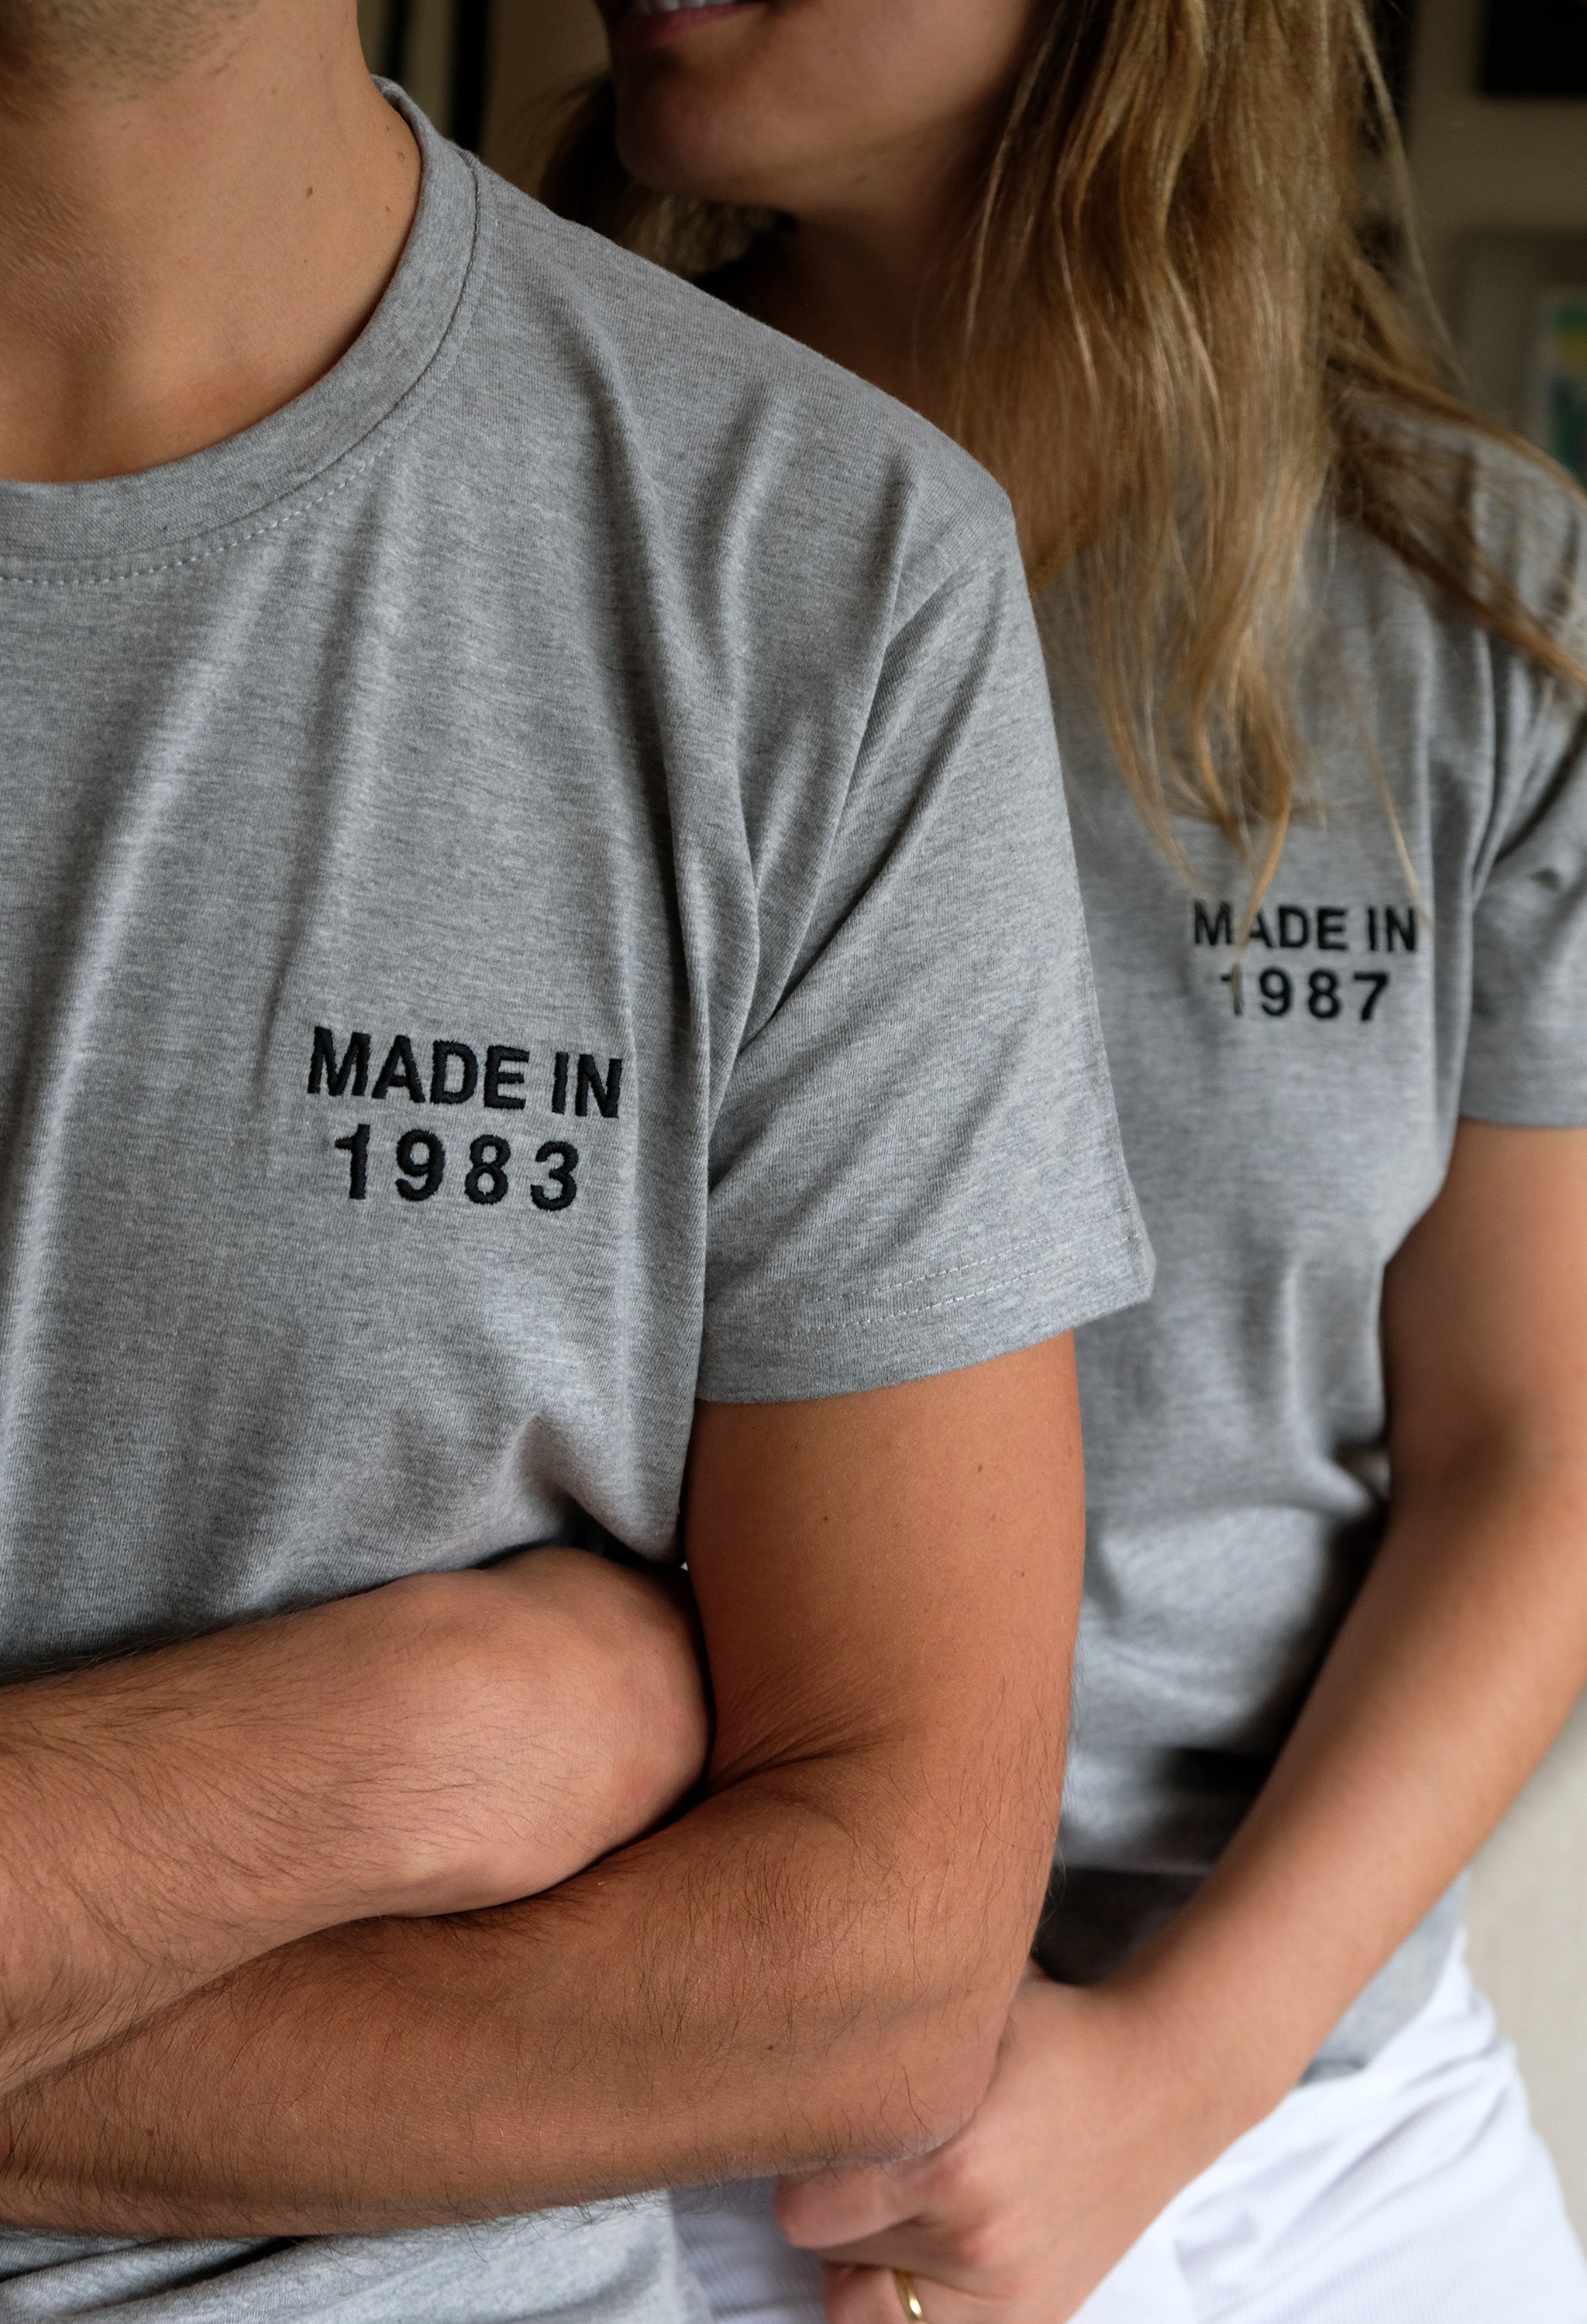 Made in... T-shirt